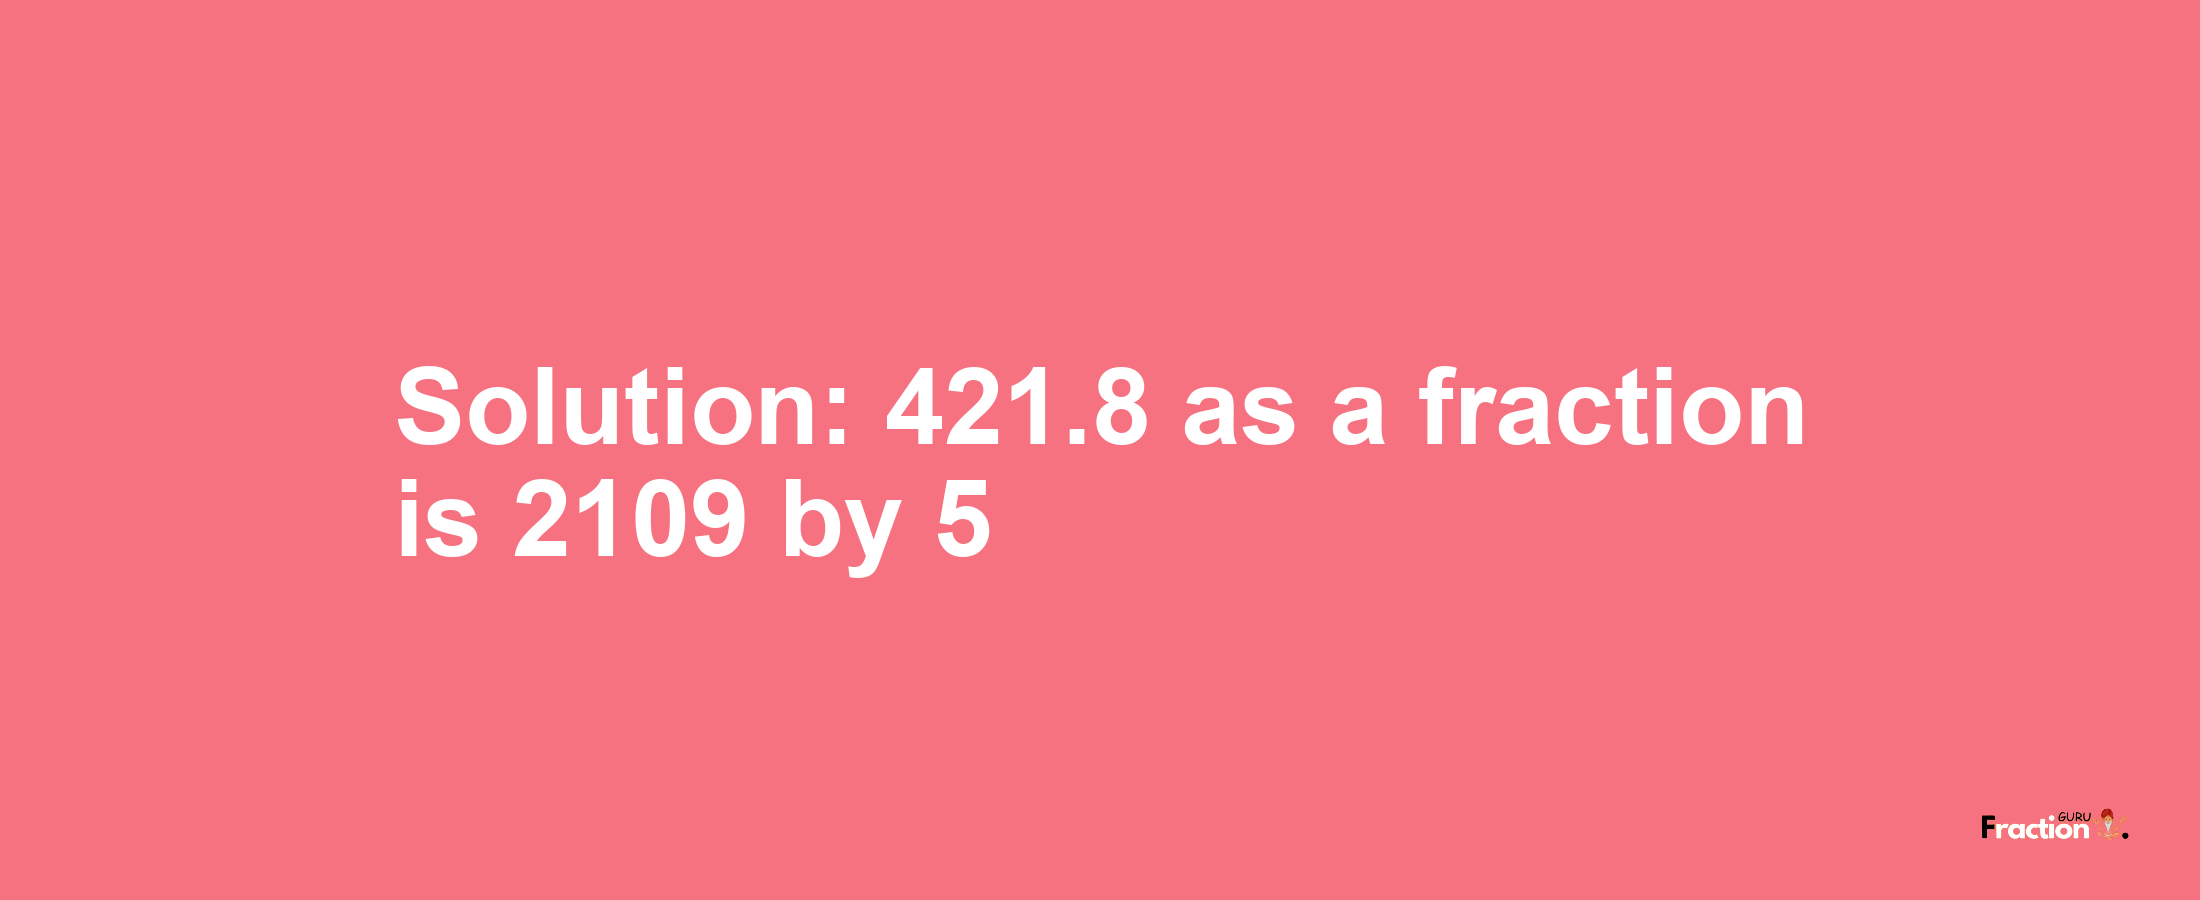 Solution:421.8 as a fraction is 2109/5